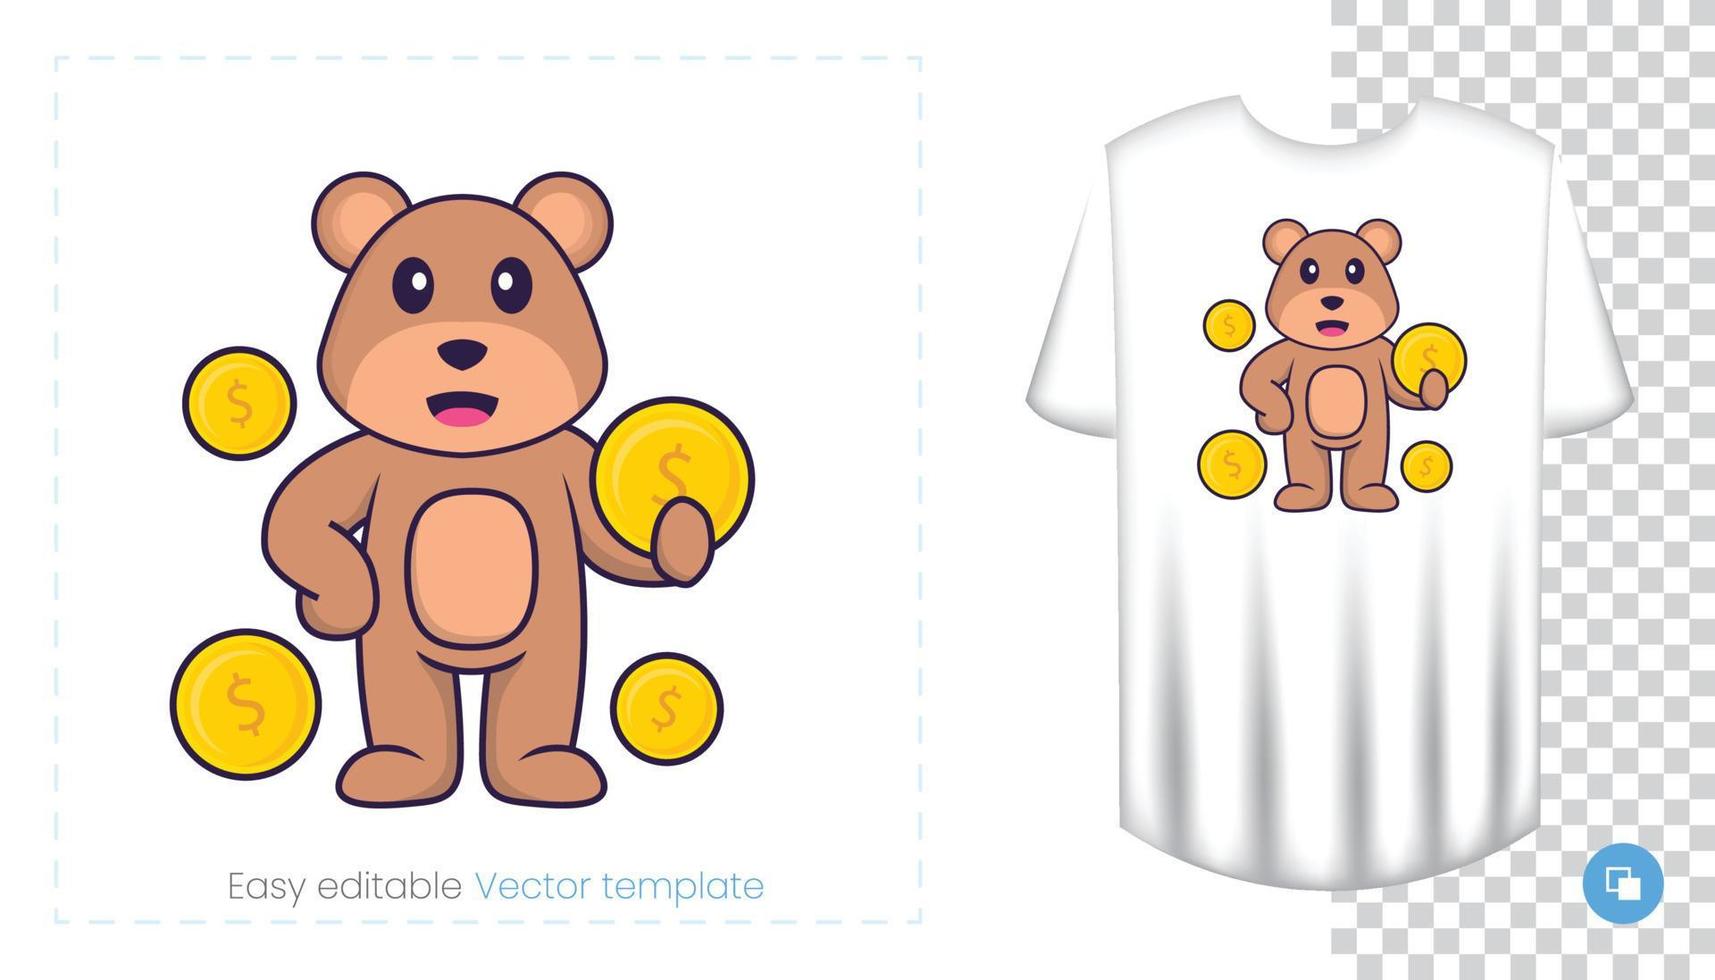 Cute bear mascot character. Can be used for stickers, pattern, patches, textiles, paper. Vector illustration